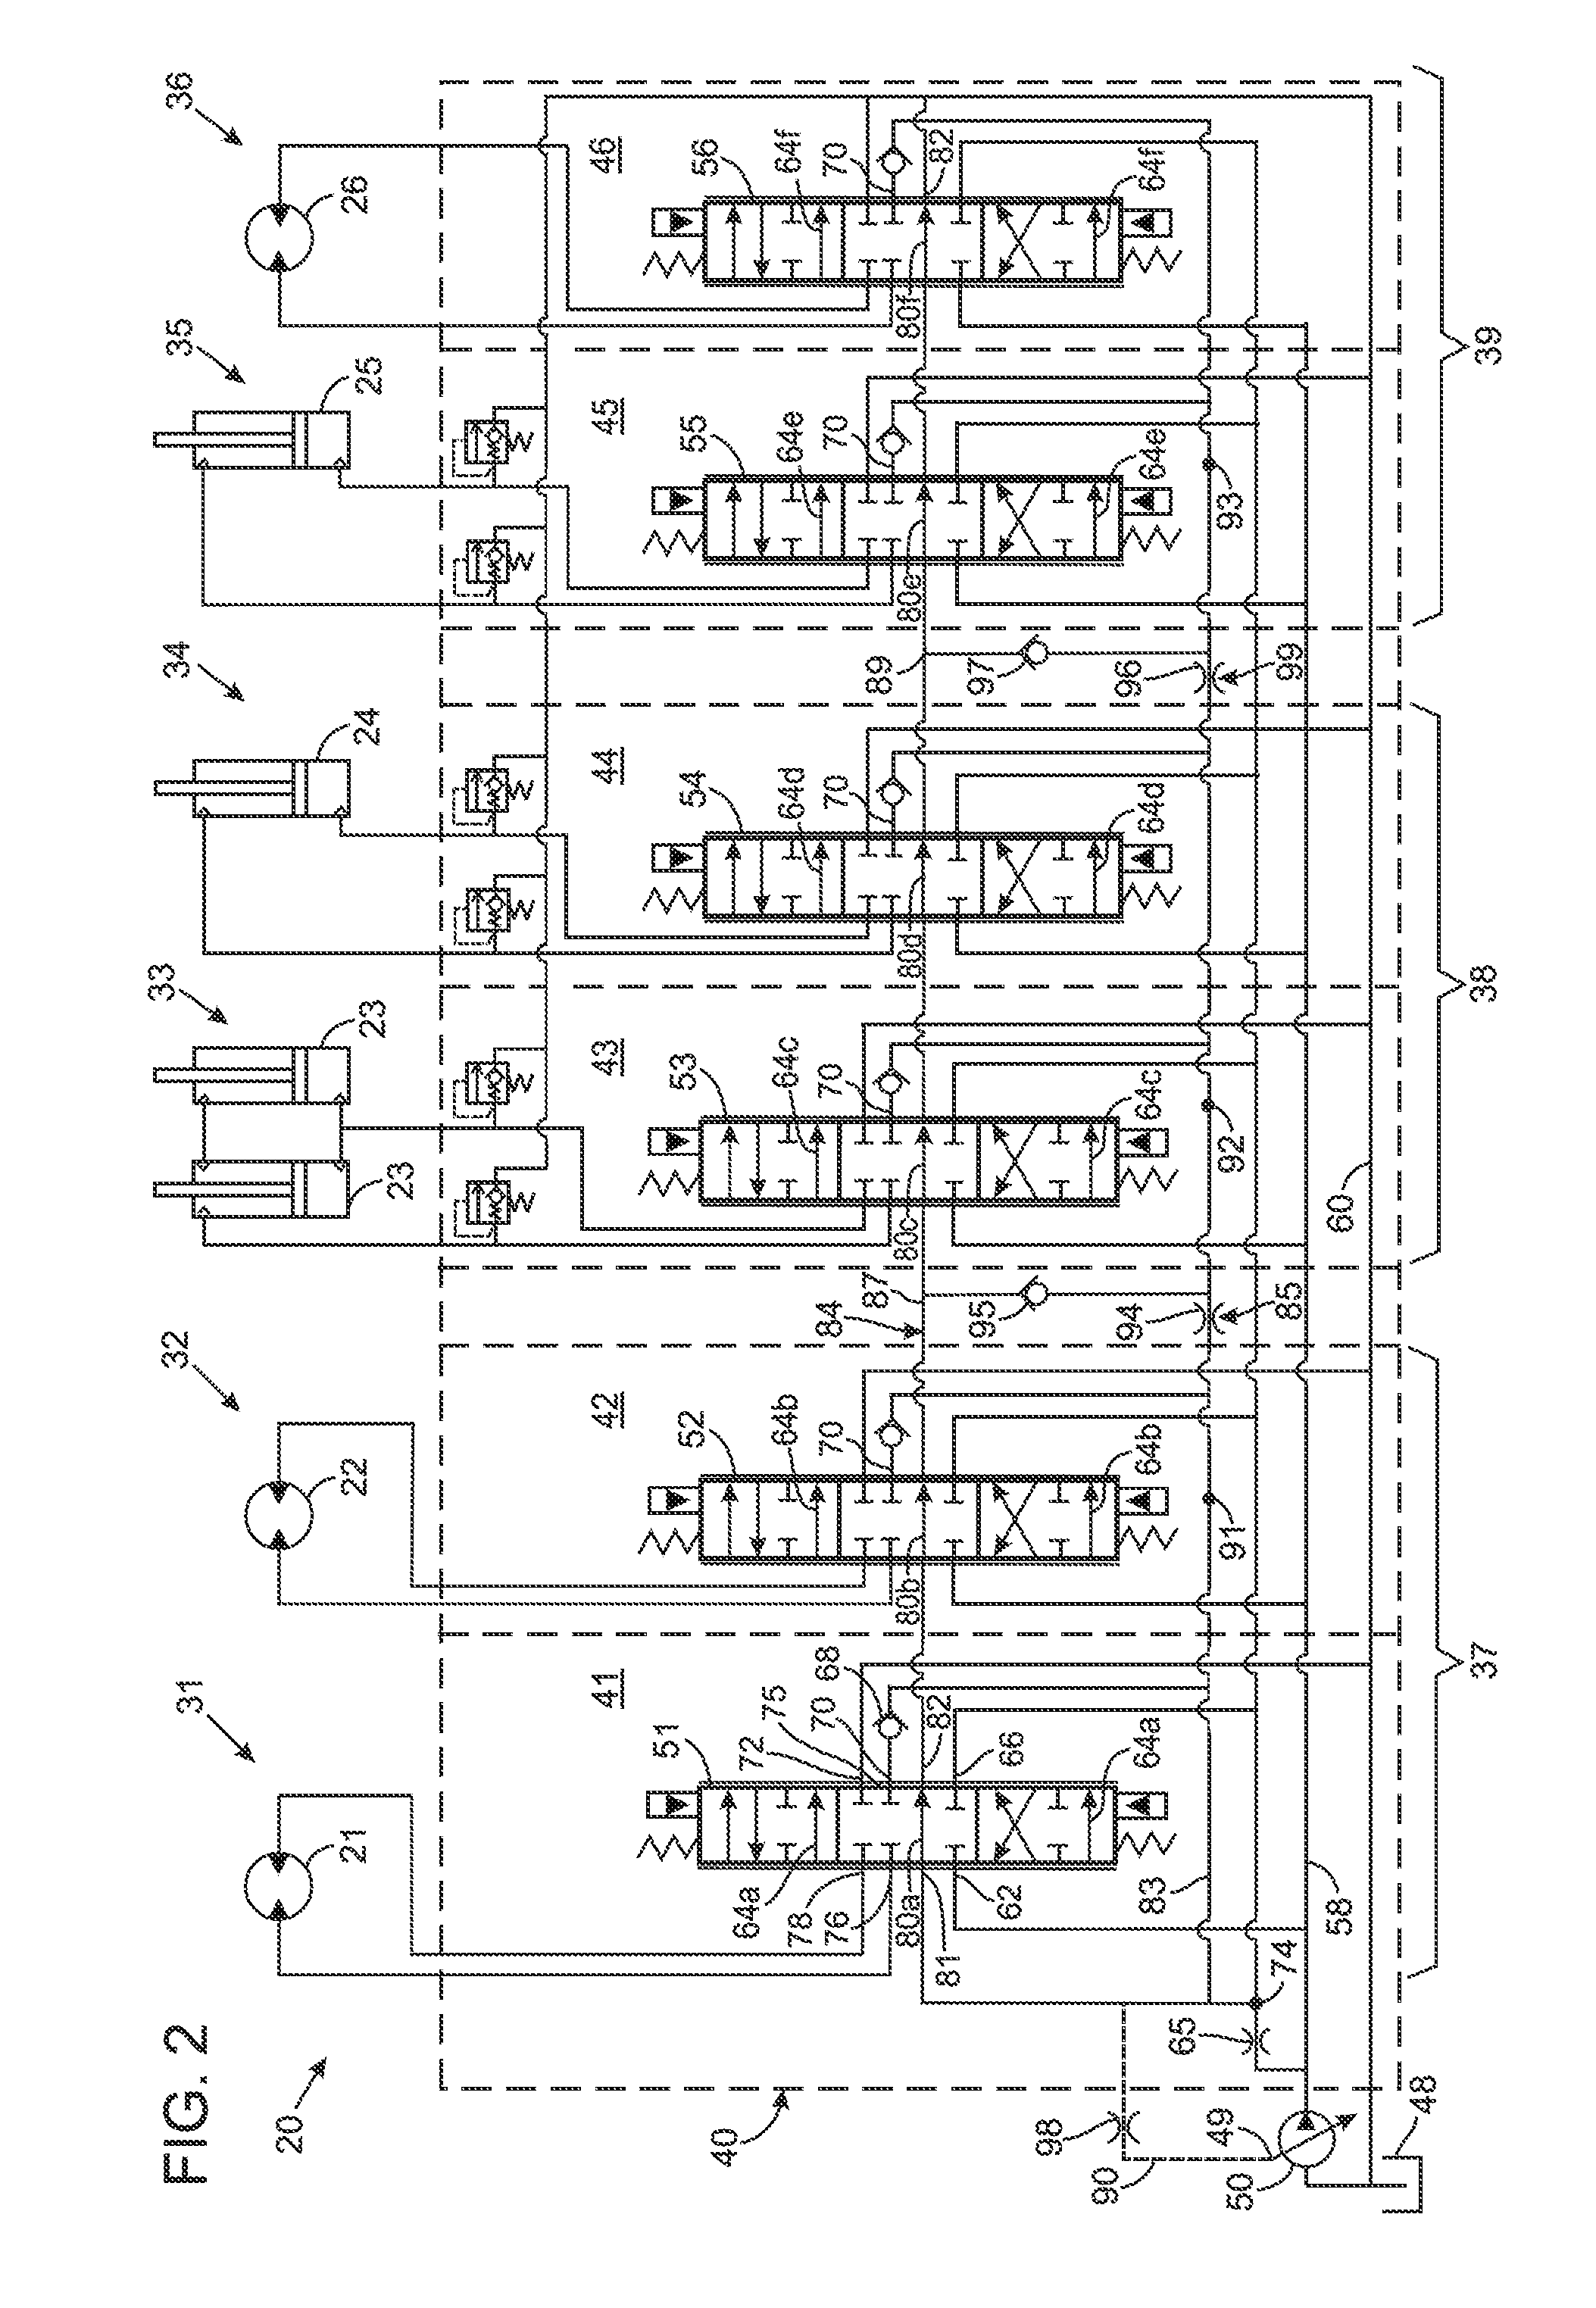 Hydraulic system with fluid flow summation control of a variable displacement pump and priority allocation of fluid flow